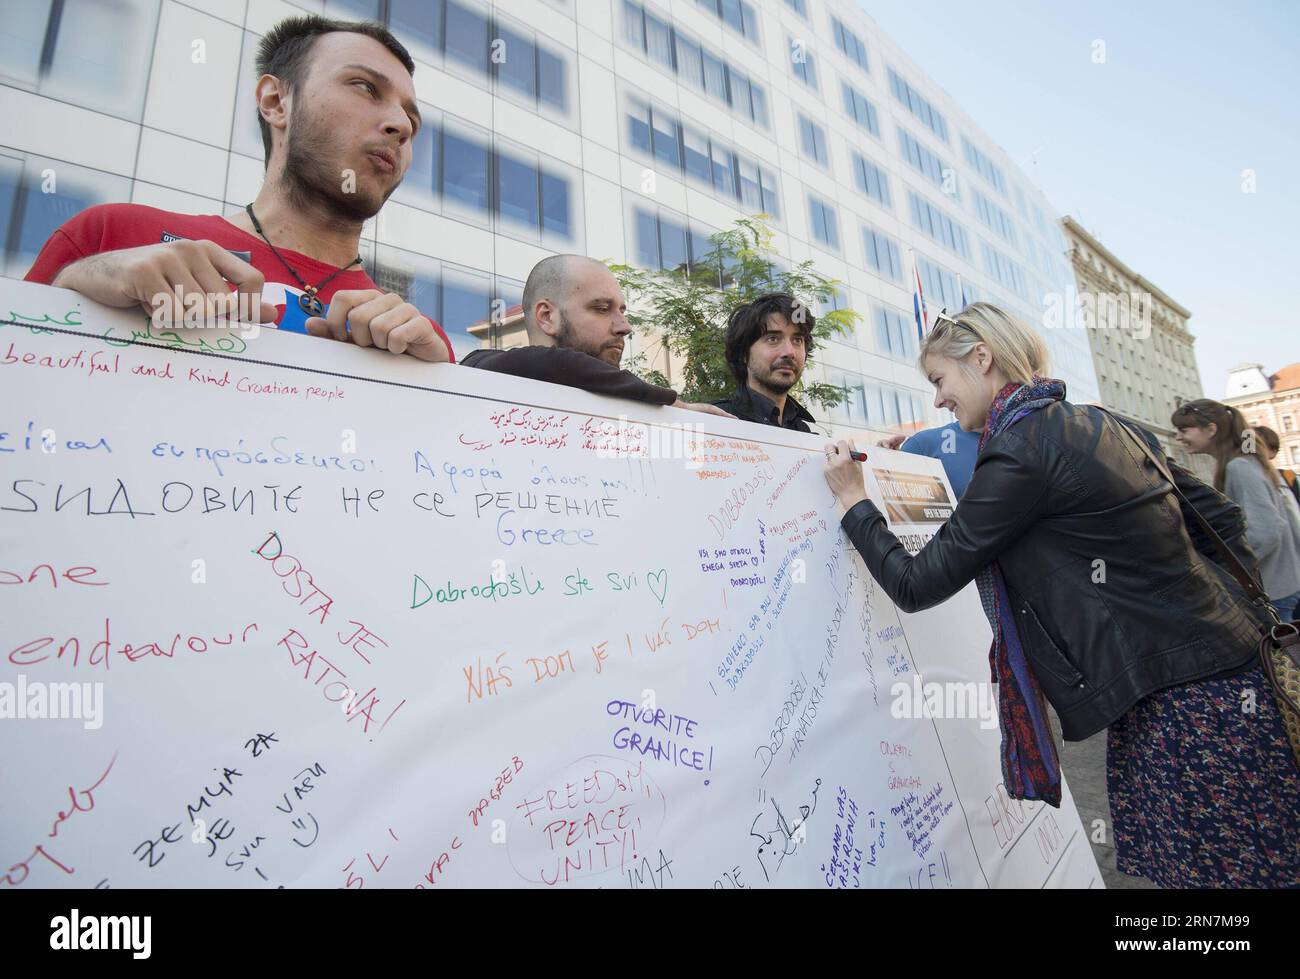 (150912) -- ZAGREB, Sept. 12, 2015 -- Croatian peace activists stage a rally in Europe Square in downtown Zagreb, capital of Croatia, Sept. 12, 2015. The rally was held within the RefugeesWelcome mobilizations on Saturday throughout Europe. ) CROATIA-ZAGREB-REFUGEES-WELCOME DAY MisoxLisanin PUBLICATIONxNOTxINxCHN   Zagreb Sept 12 2015 Croatian Peace activists Stage a Rally in Europe Square in Downtown Zagreb Capital of Croatia Sept 12 2015 The Rally what Hero Within The  mobilizations ON Saturday throughout Europe Croatia Zagreb Refugees Welcome Day MisoxLisanin PUBLICATIONxNOTxINxCHN Stock Photo